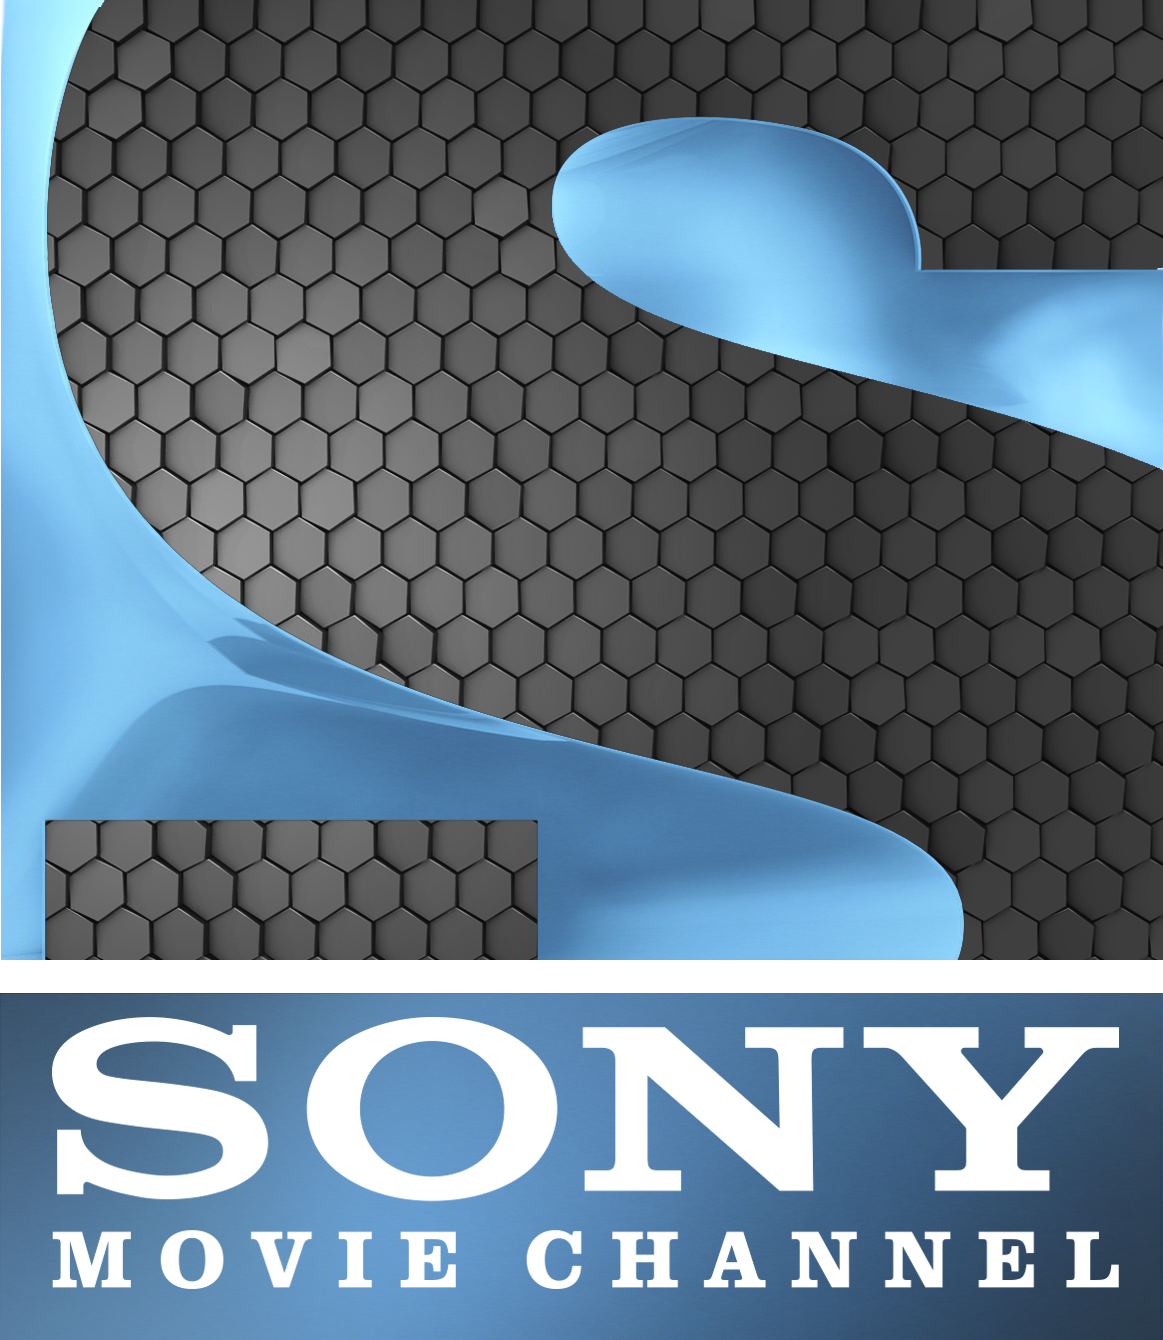 File:Sony TV new.png - Wikipedia